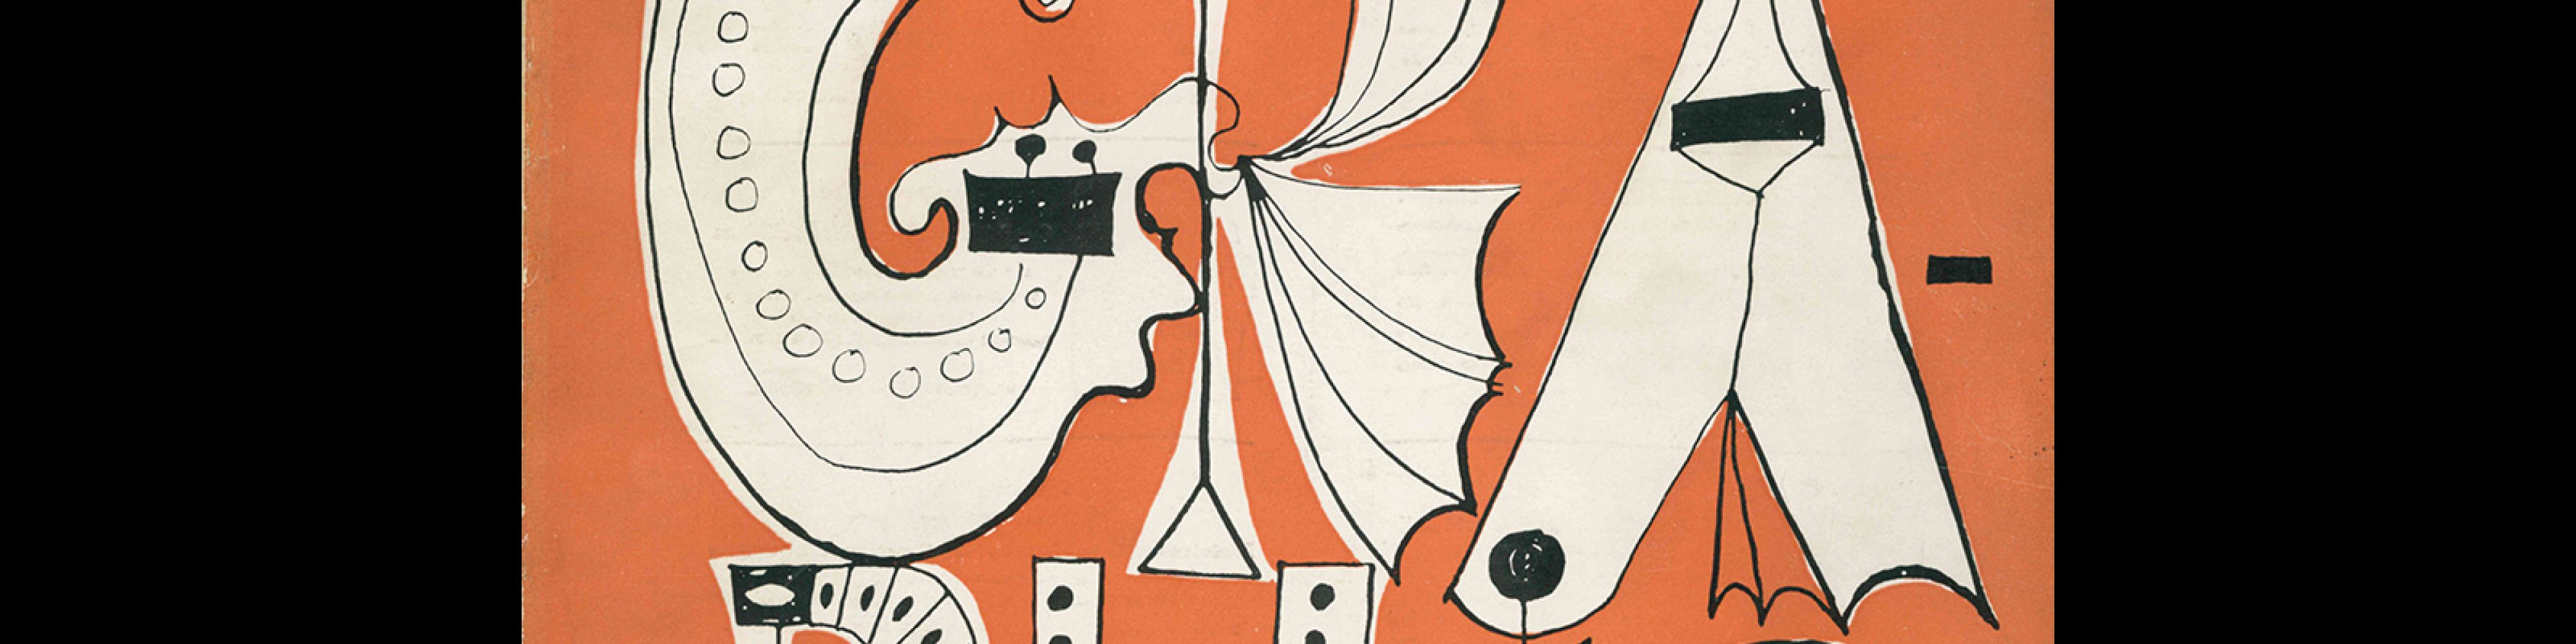 Graphis 13, 1946. Cover design by Imre Reiner